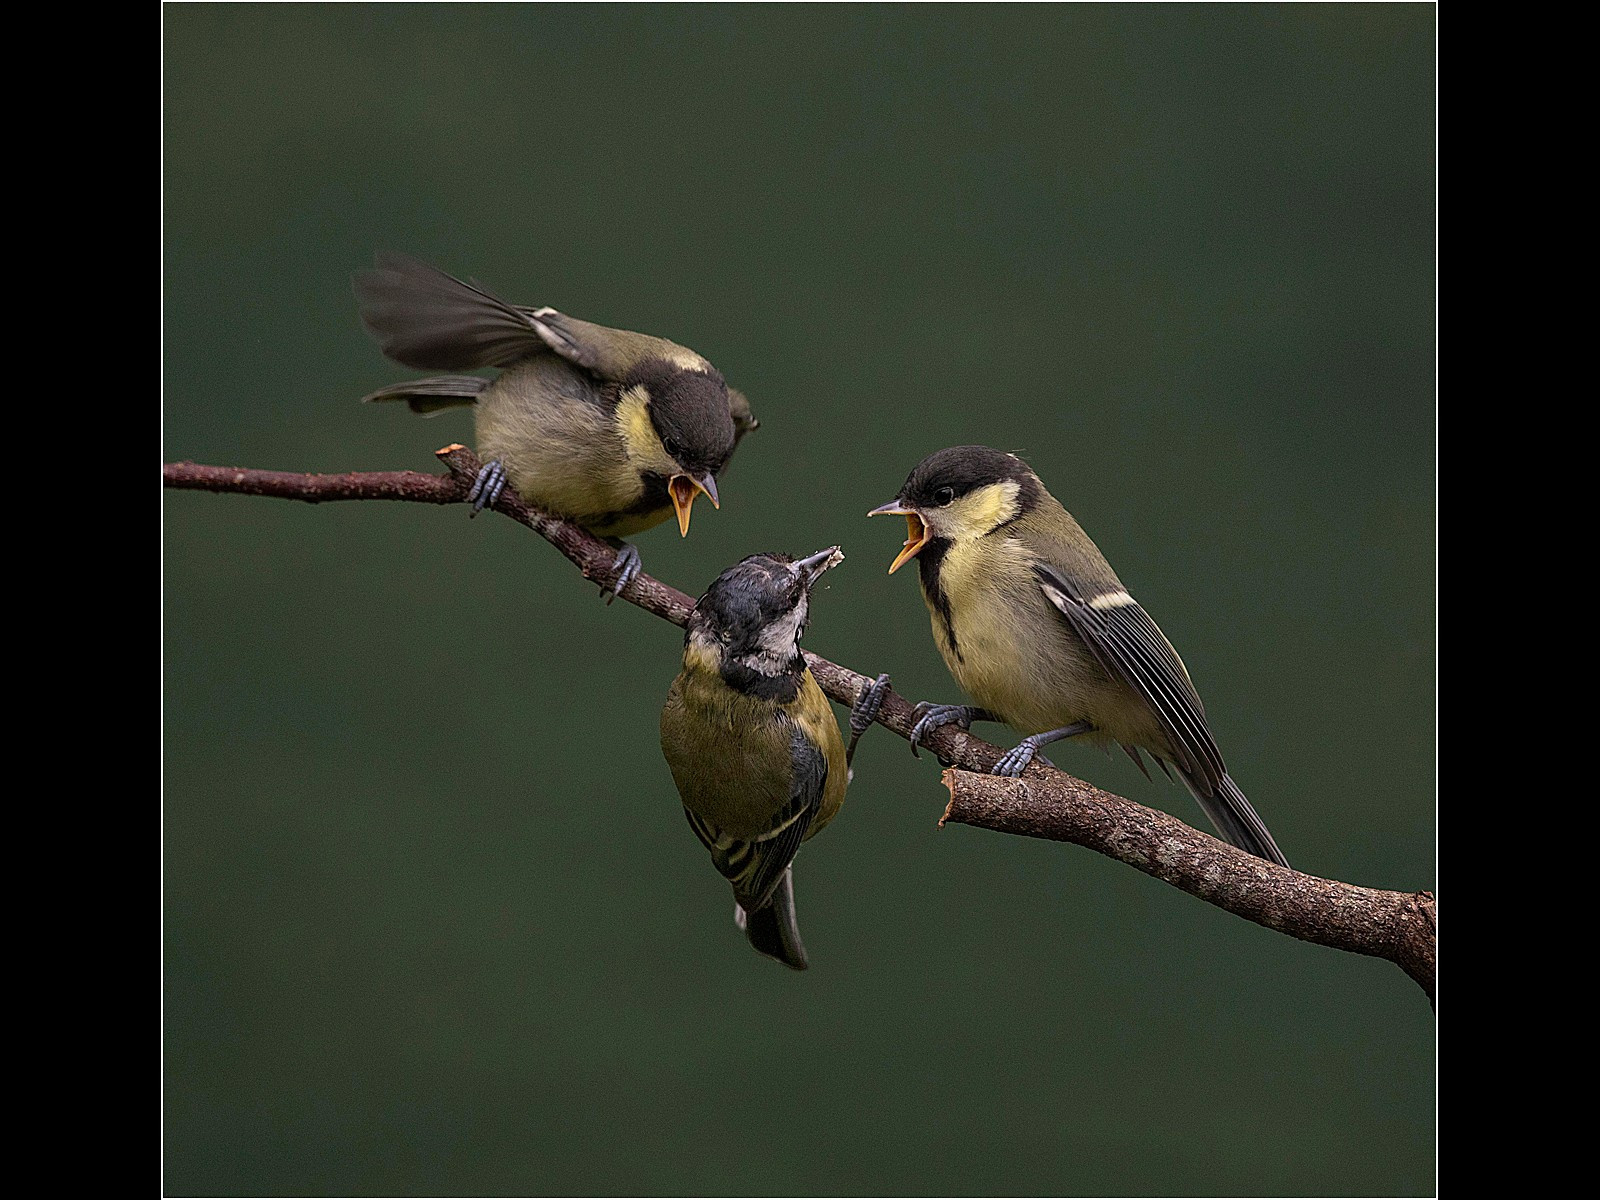 Female Great Tit Feeding Young